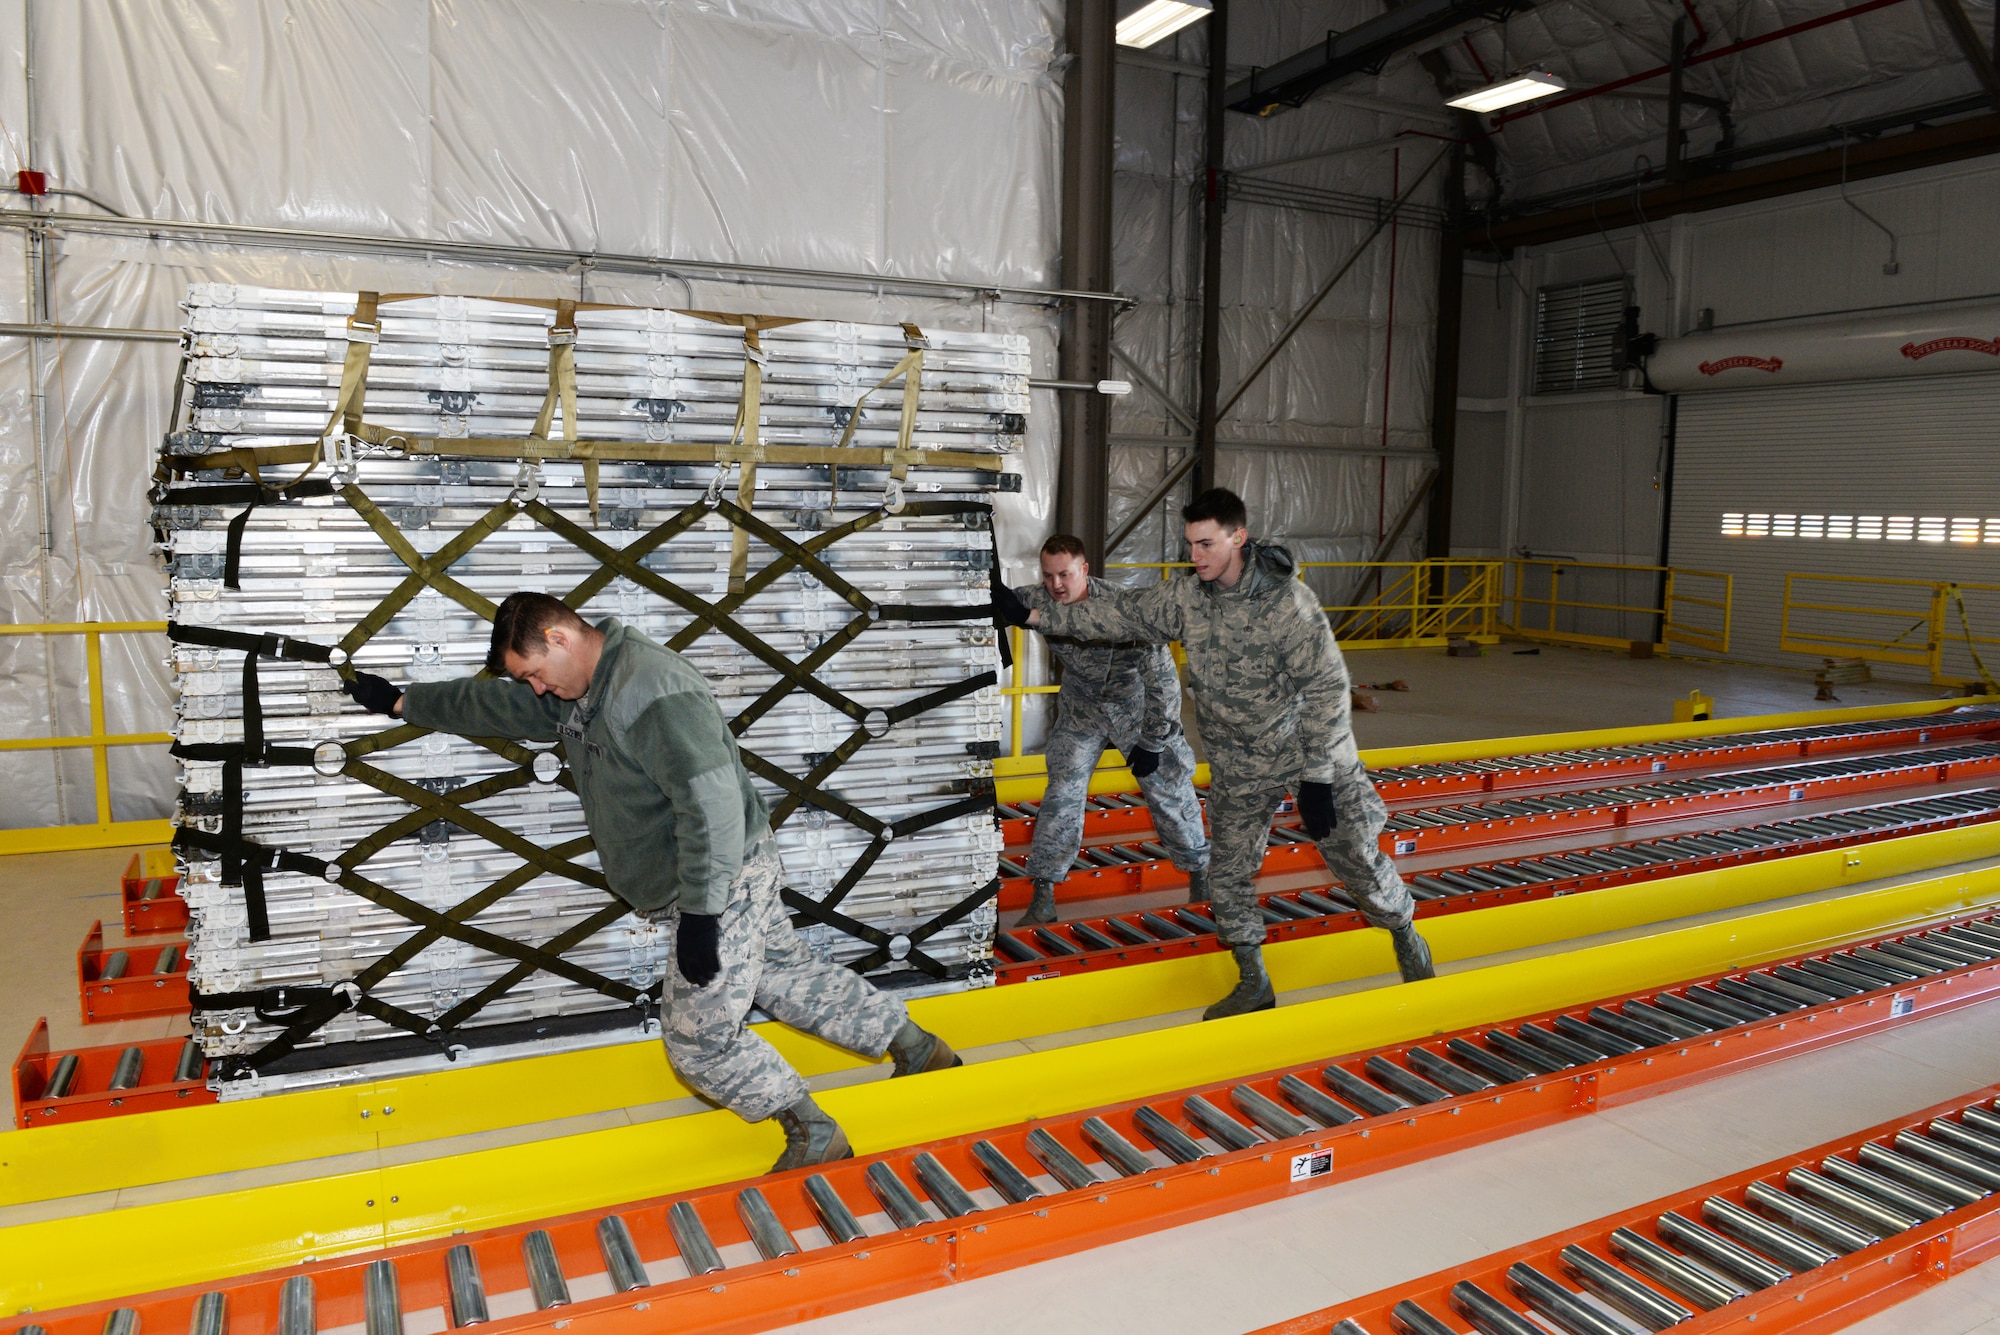 Staff Sgt. Ryan Olszewski, Senior Airman Andrew Poole and Airman 1st Class Hugh McMackin guide a pallet on the new pallet racking system, Nov. 7, 2018, at Pease Air National Guard Base, N.H. (Photo by Master Sgt. Thomas Johnson, 157th ARW Public Affairs)